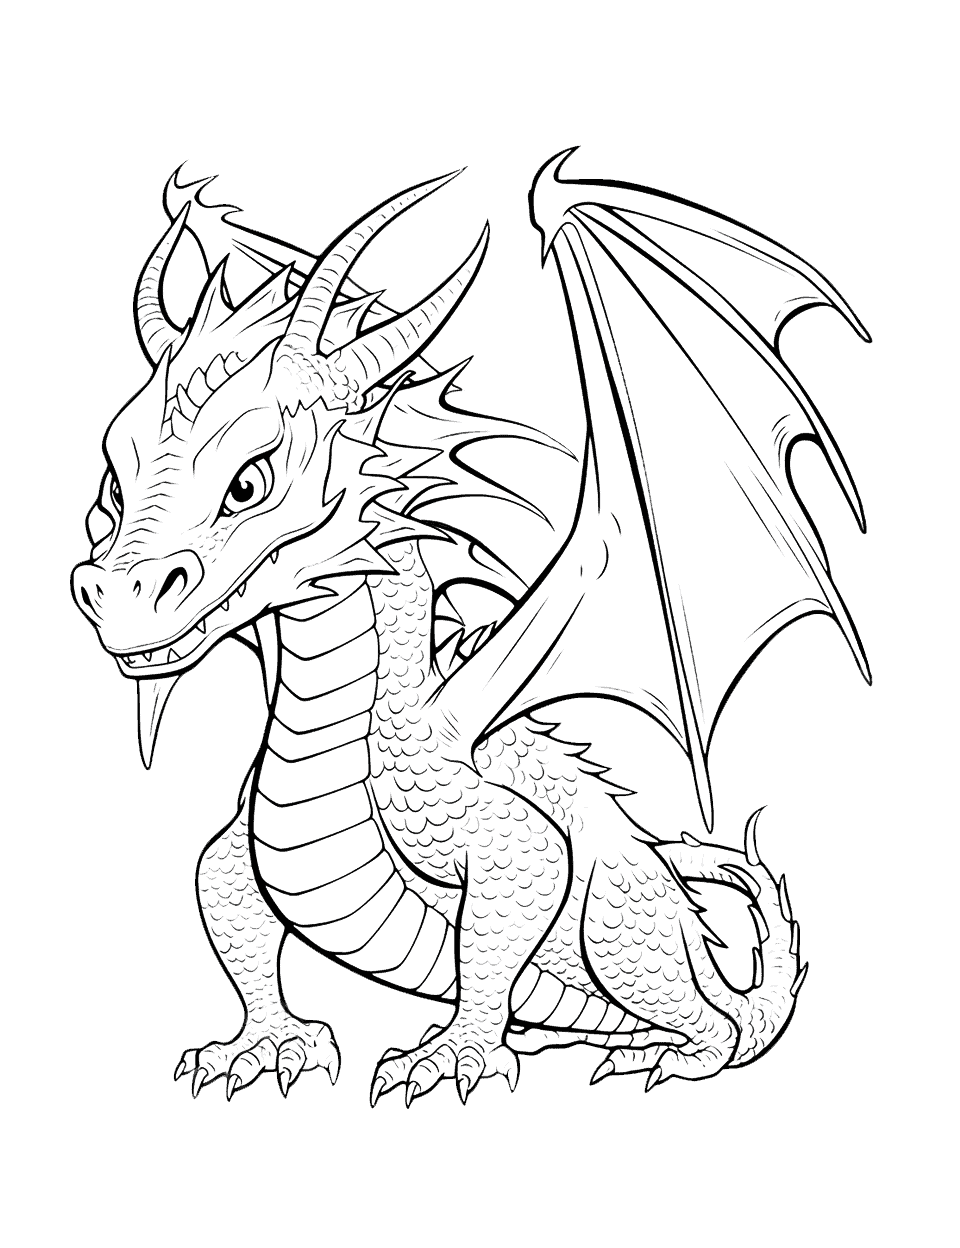 Icewing Dragon Coloring Page - A beautiful Icewing dragon, its crystalline scales reflecting the light.